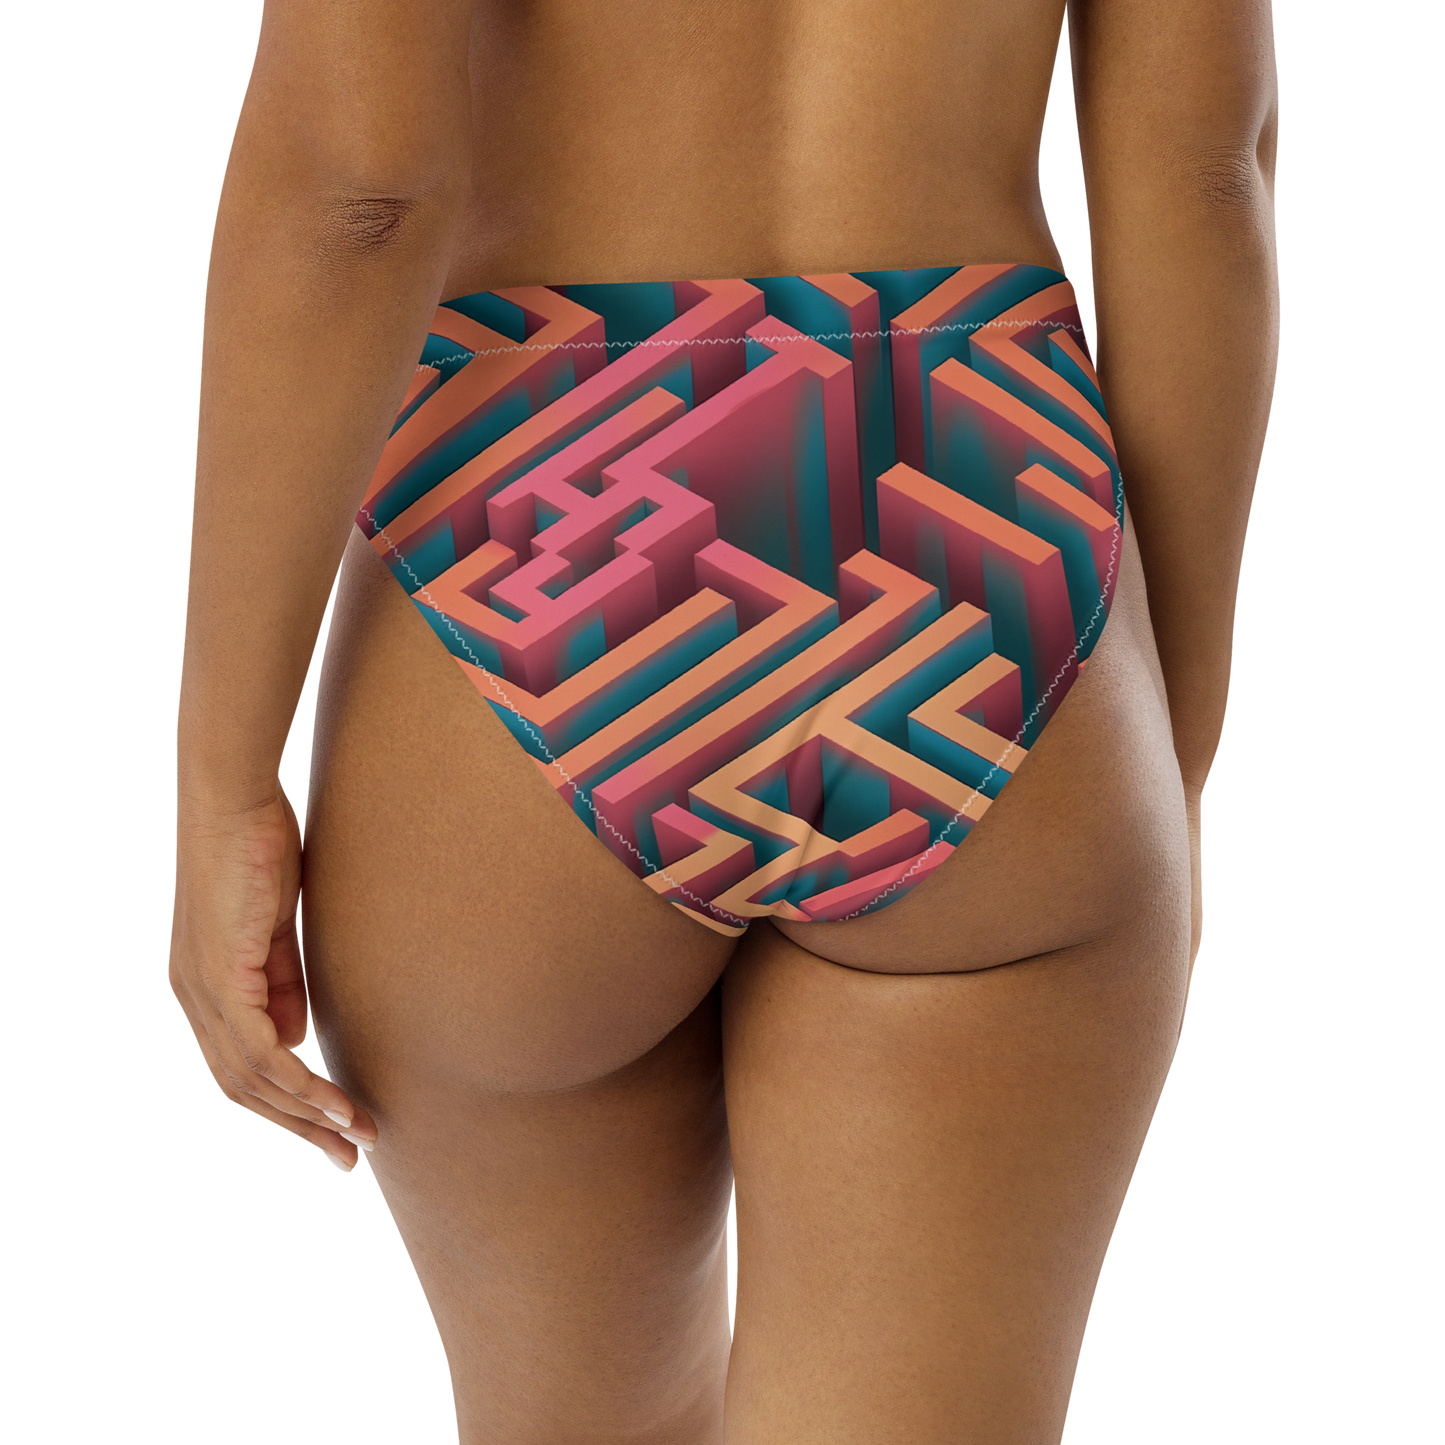 3D Maze Illusion | 3D Patterns | All-Over Print Recycled High-Waisted Bikini Bottom - #1